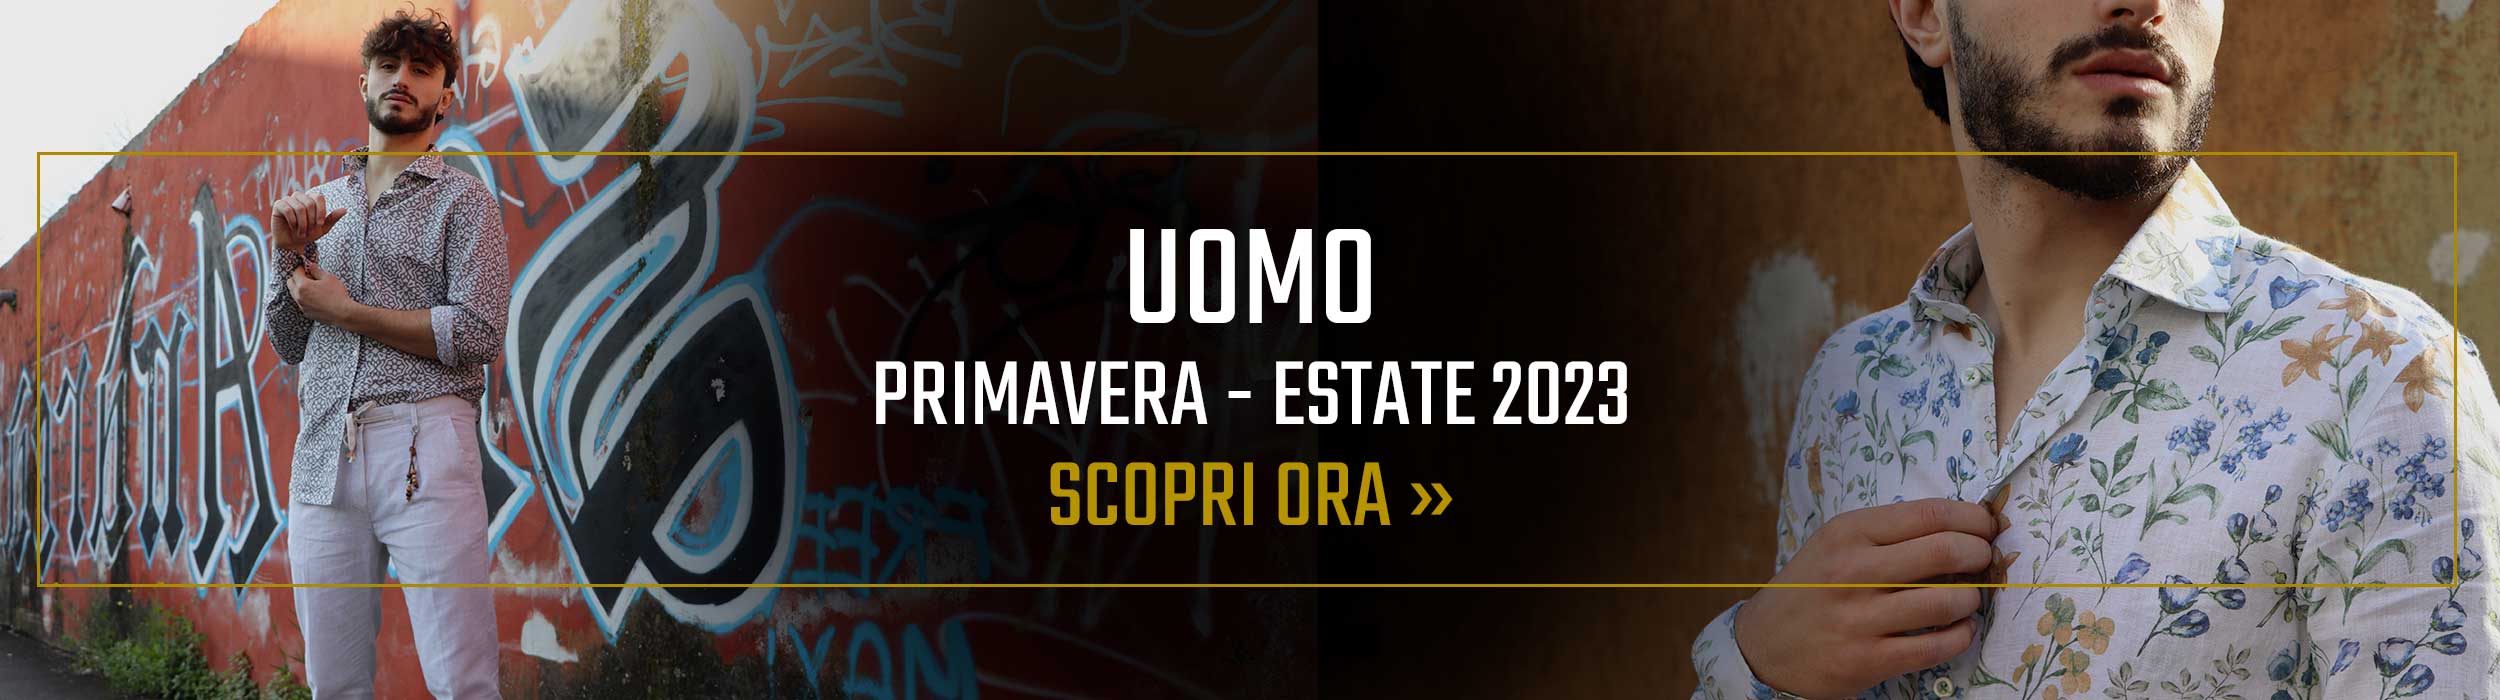 New Collection PE 2023 - Uomo